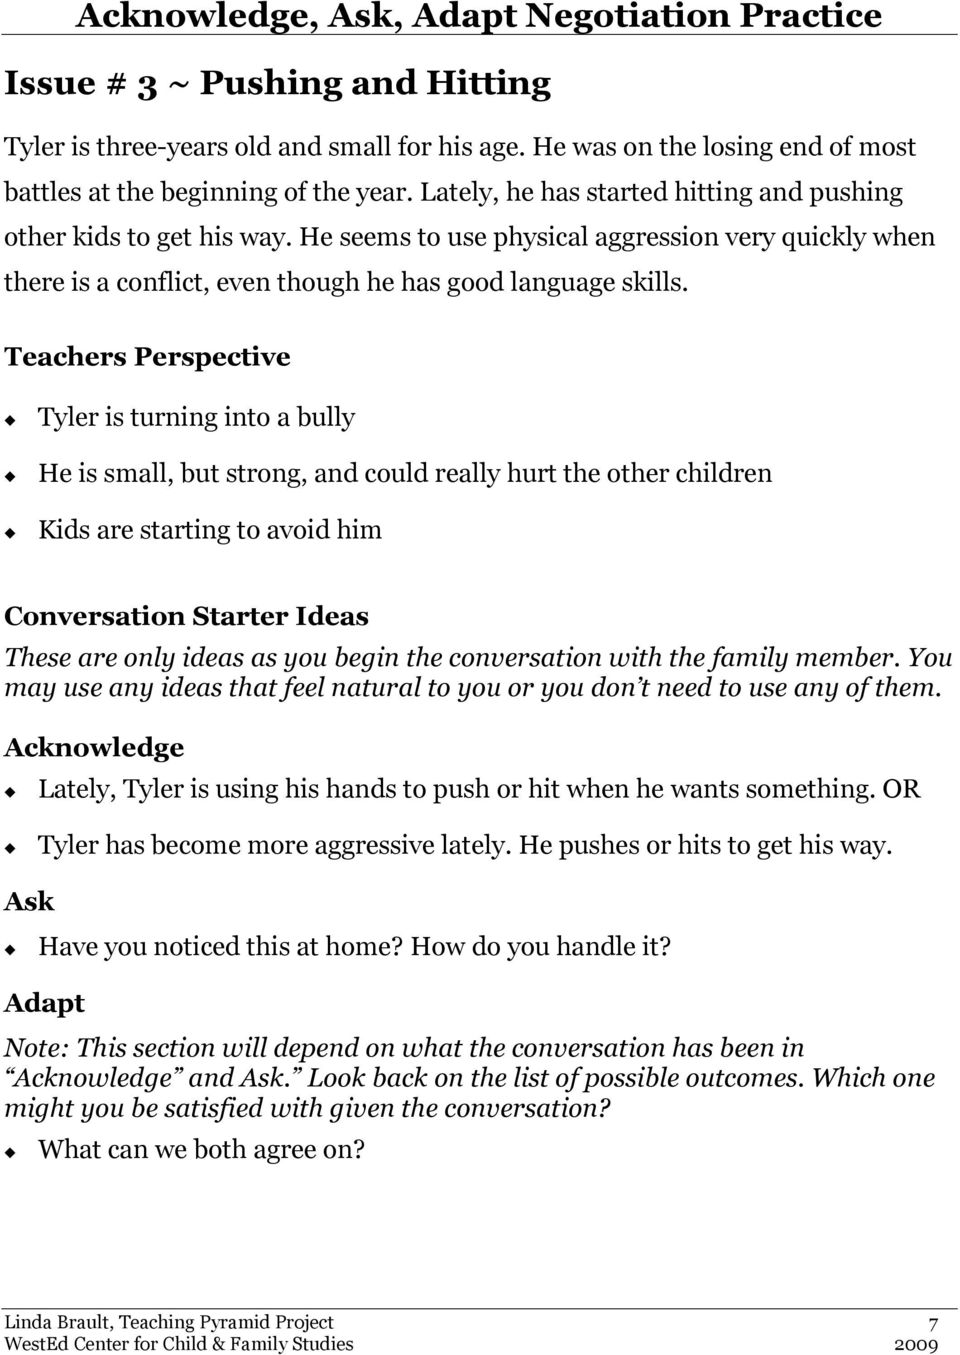 Teachers Perspective Tyler is turning into a bully He is small, but strong, and could really hurt the other children Kids are starting to avoid him Conversation Starter Ideas These are only ideas as